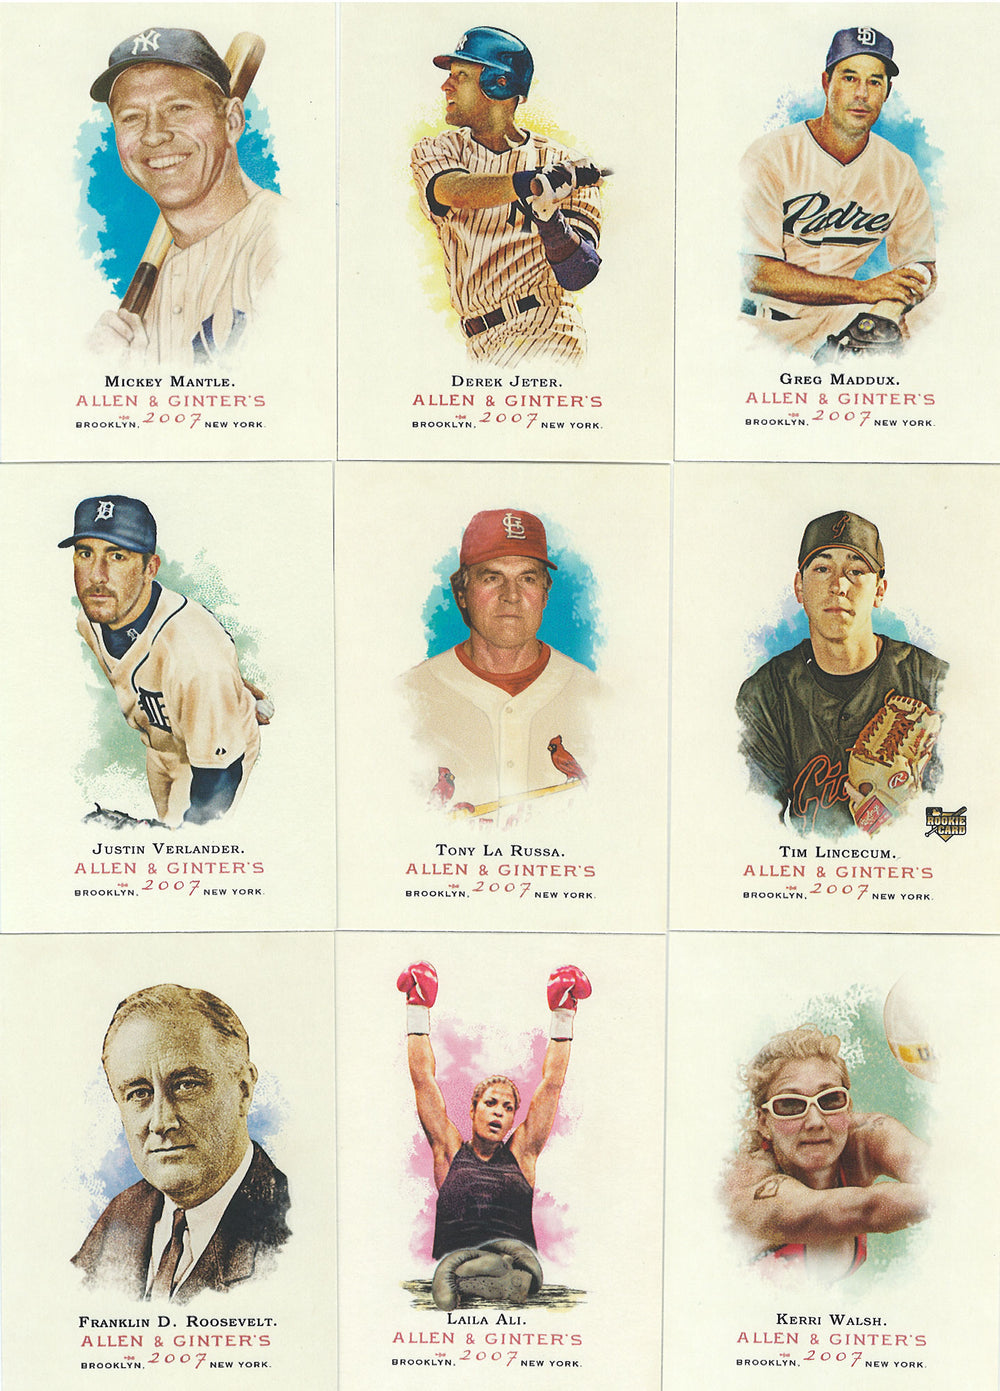 2007 Topps Allen and Ginter Series Complete Mint Set with Shortprints (Baseball + Historical Figures!)